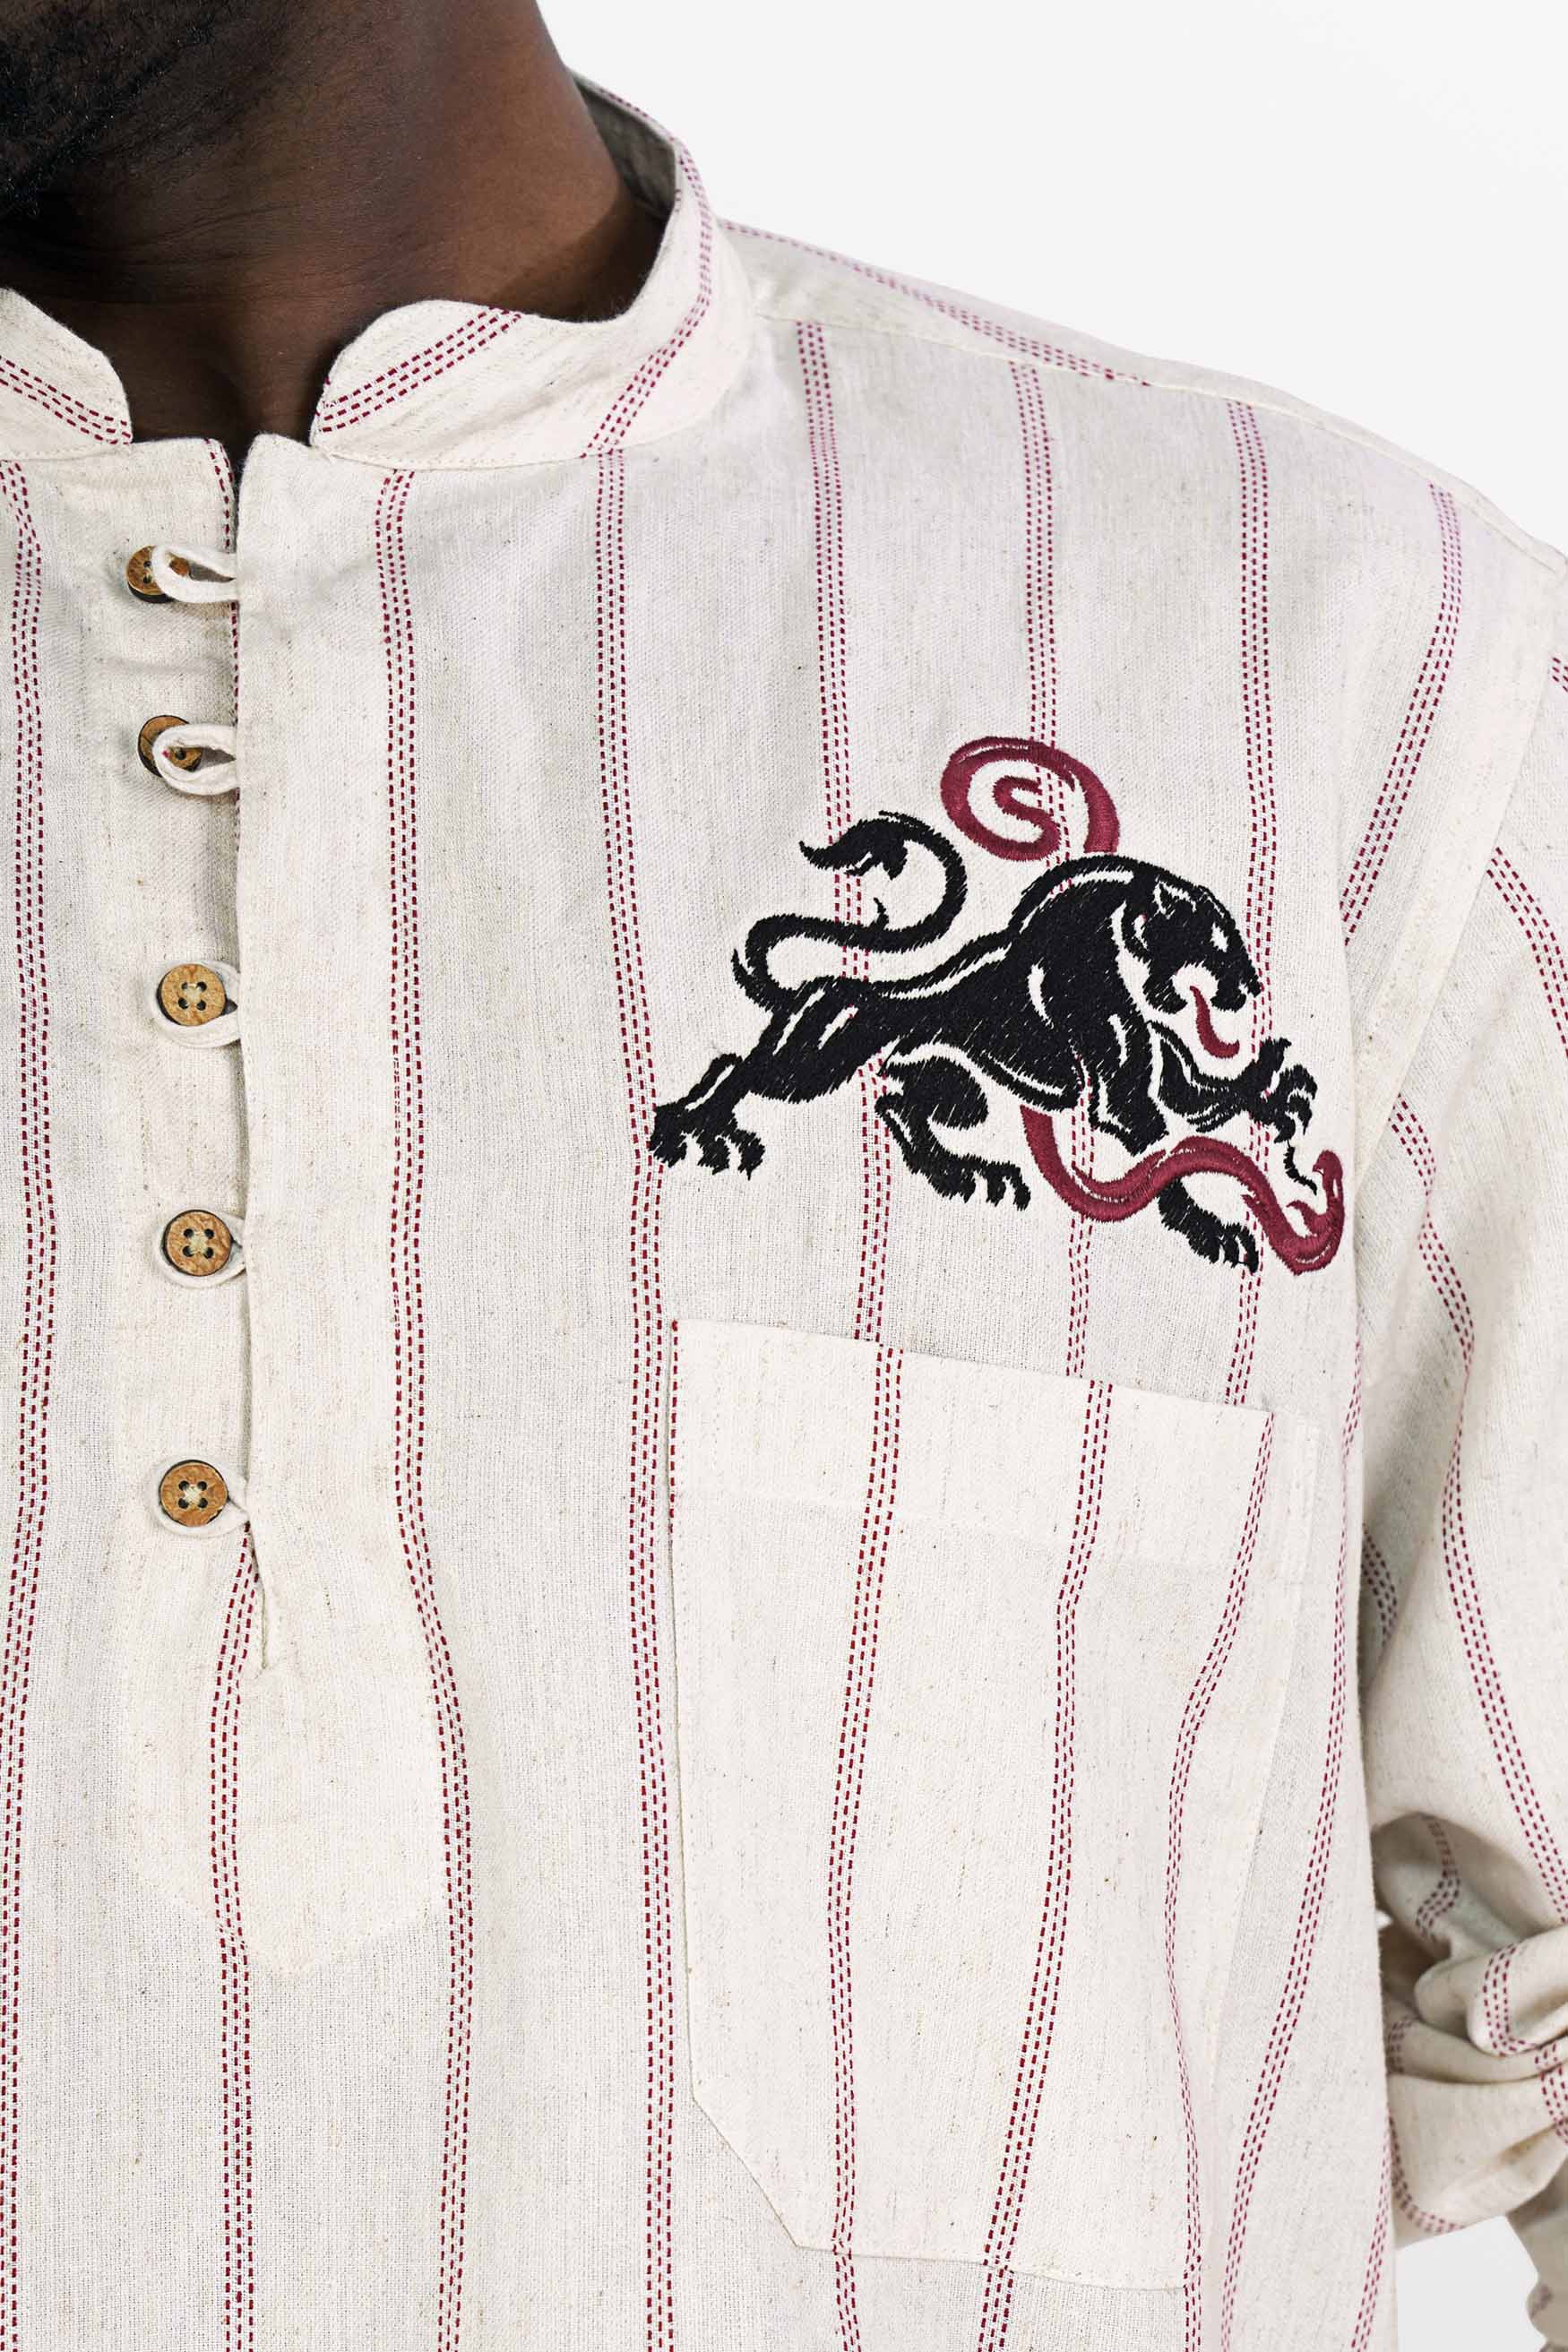 Parchment Beige with Cerise Red Striped Funky Embroidered Luxurious Linen Kurta Shirt 5268-KS-E185-38, 5268-KS-E185-H-38, 5268-KS-E185-39, 5268-KS-E185-H-39, 5268-KS-E185-40, 5268-KS-E185-H-40, 5268-KS-E185-42, 5268-KS-E185-H-42, 5268-KS-E185-44, 5268-KS-E185-H-44, 5268-KS-E185-46, 5268-KS-E185-H-46, 5268-KS-E185-48, 5268-KS-E185-H-48, 5268-KS-E185-50, 5268-KS-E185-H-50, 5268-KS-E185-52, 5268-KS-E185-H-52